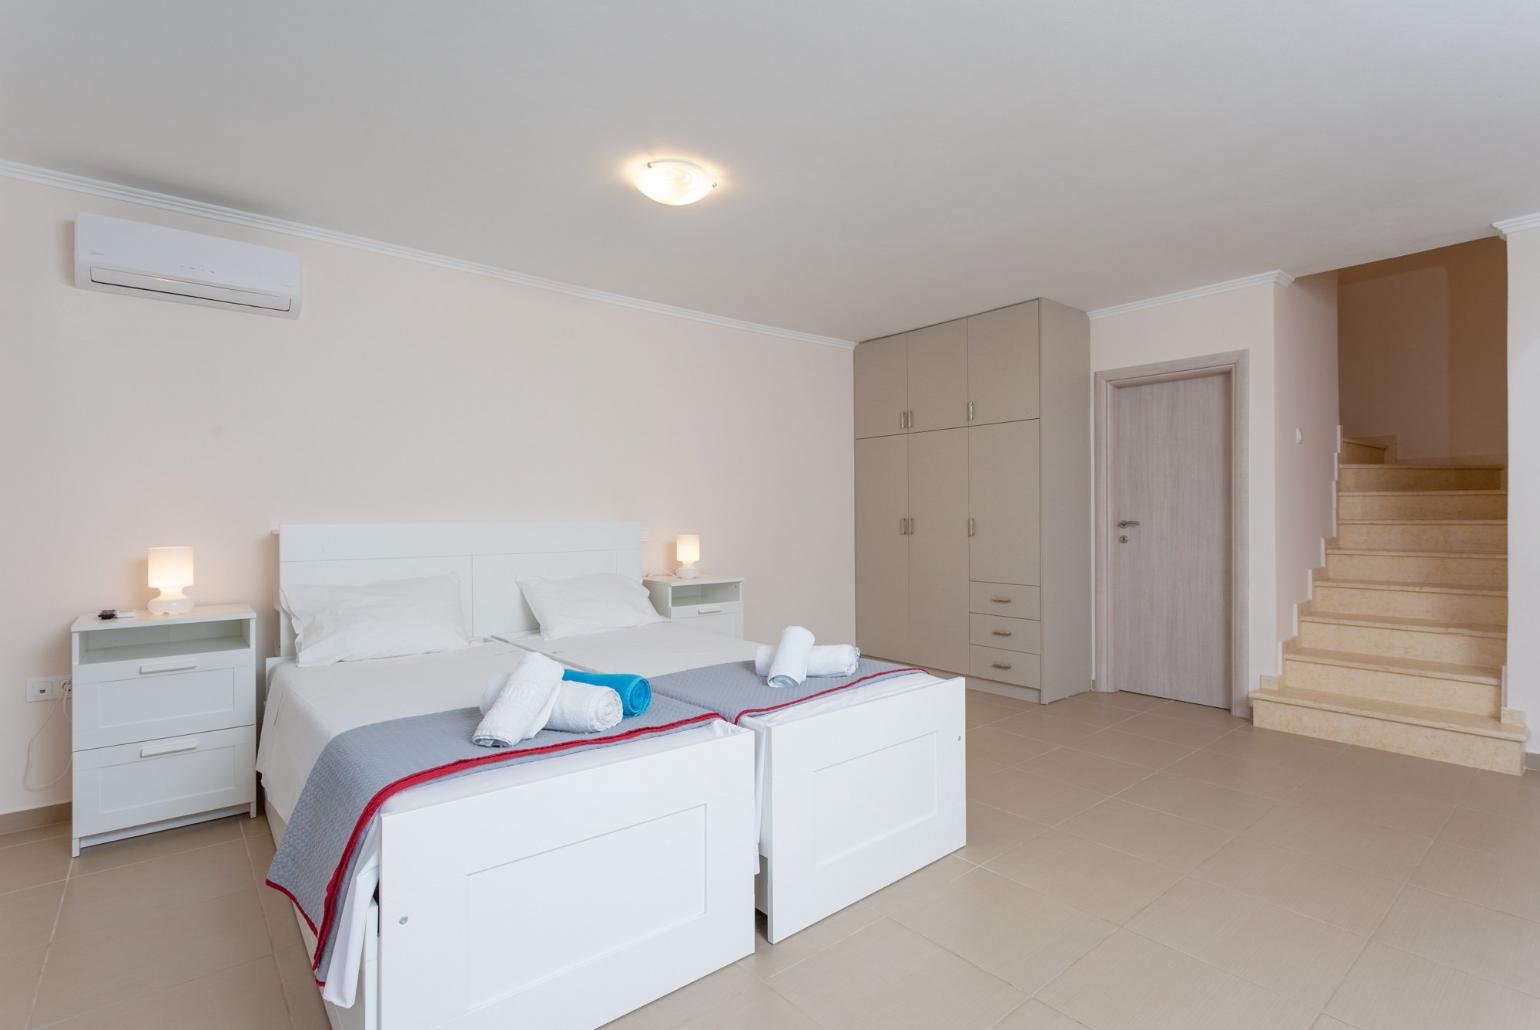 Twin bedroom with en suite bathroom, A/C, TV, and pool terrace access